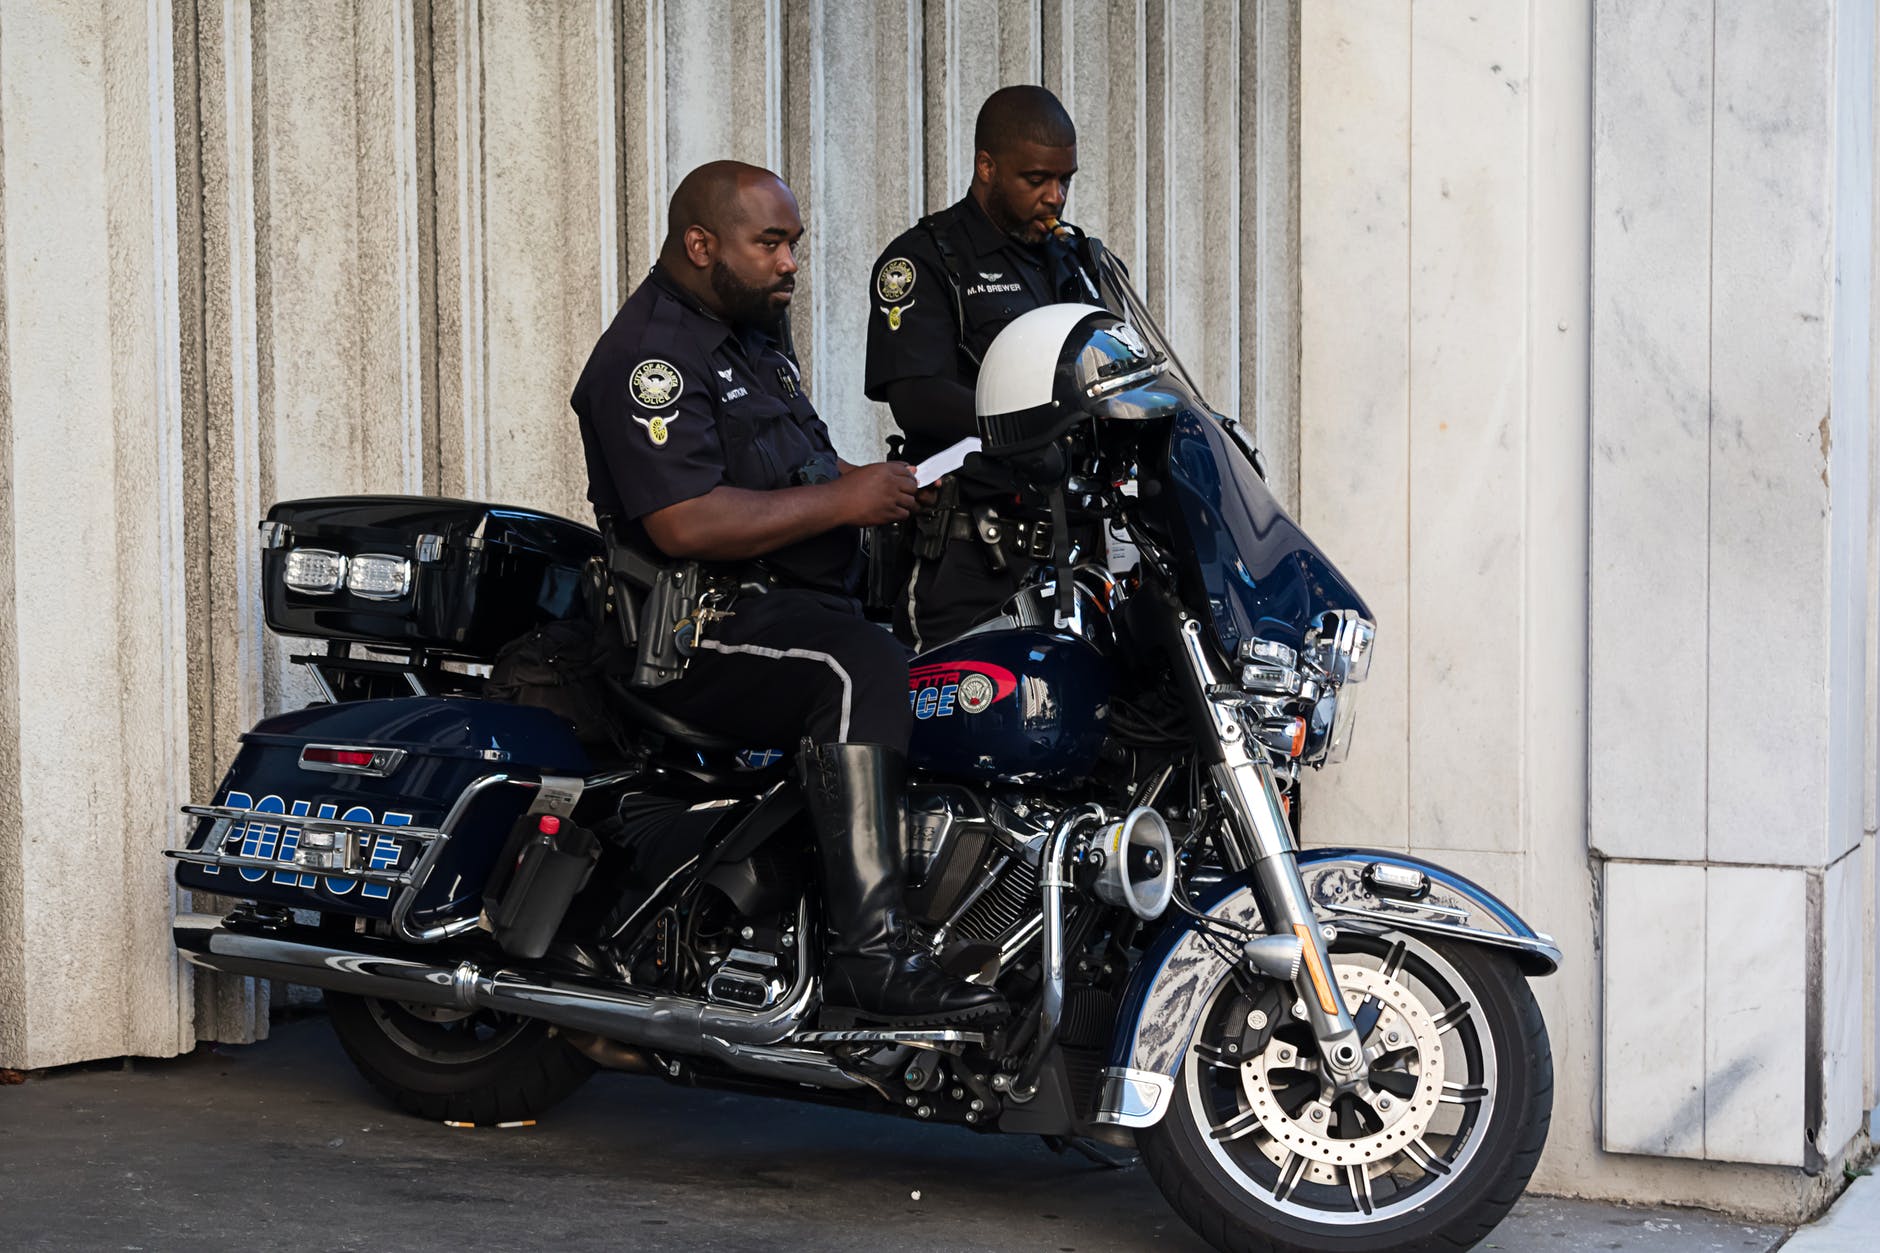 Two police officers on their motorcycle | Source: Pexels